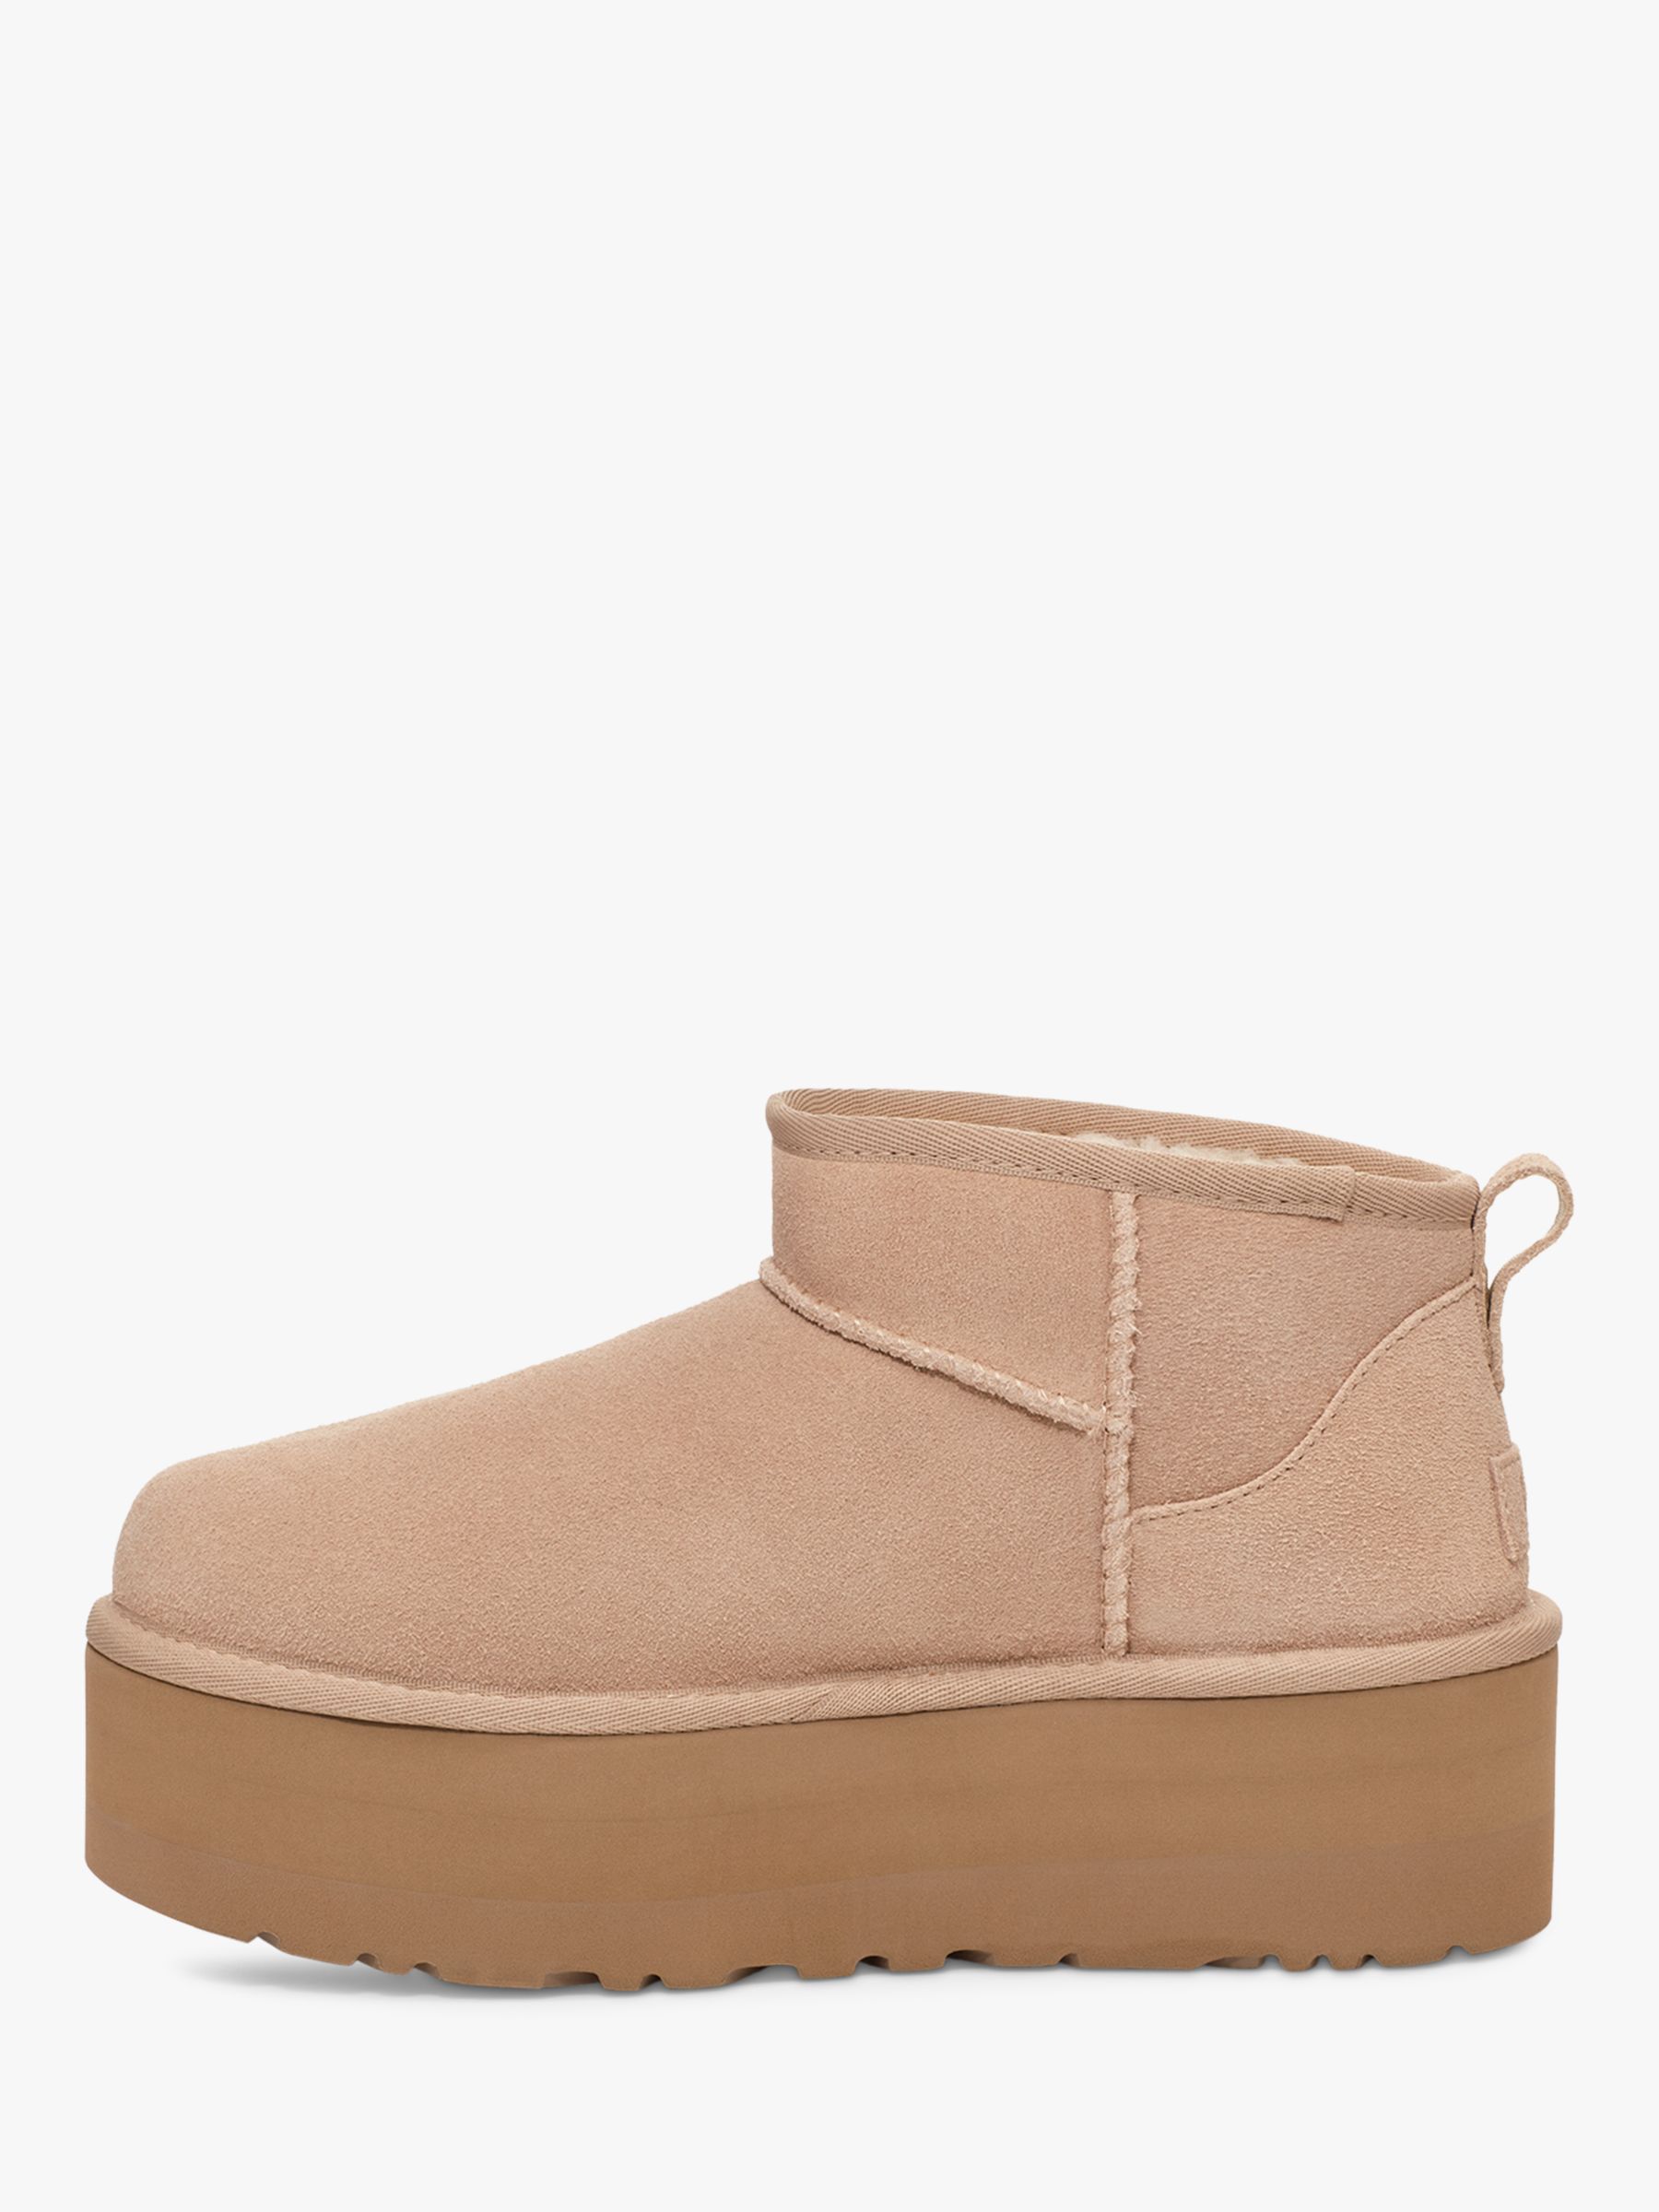 UGG Classic Ultra Mini Platform Suede Boots, Sand at John Lewis & Partners